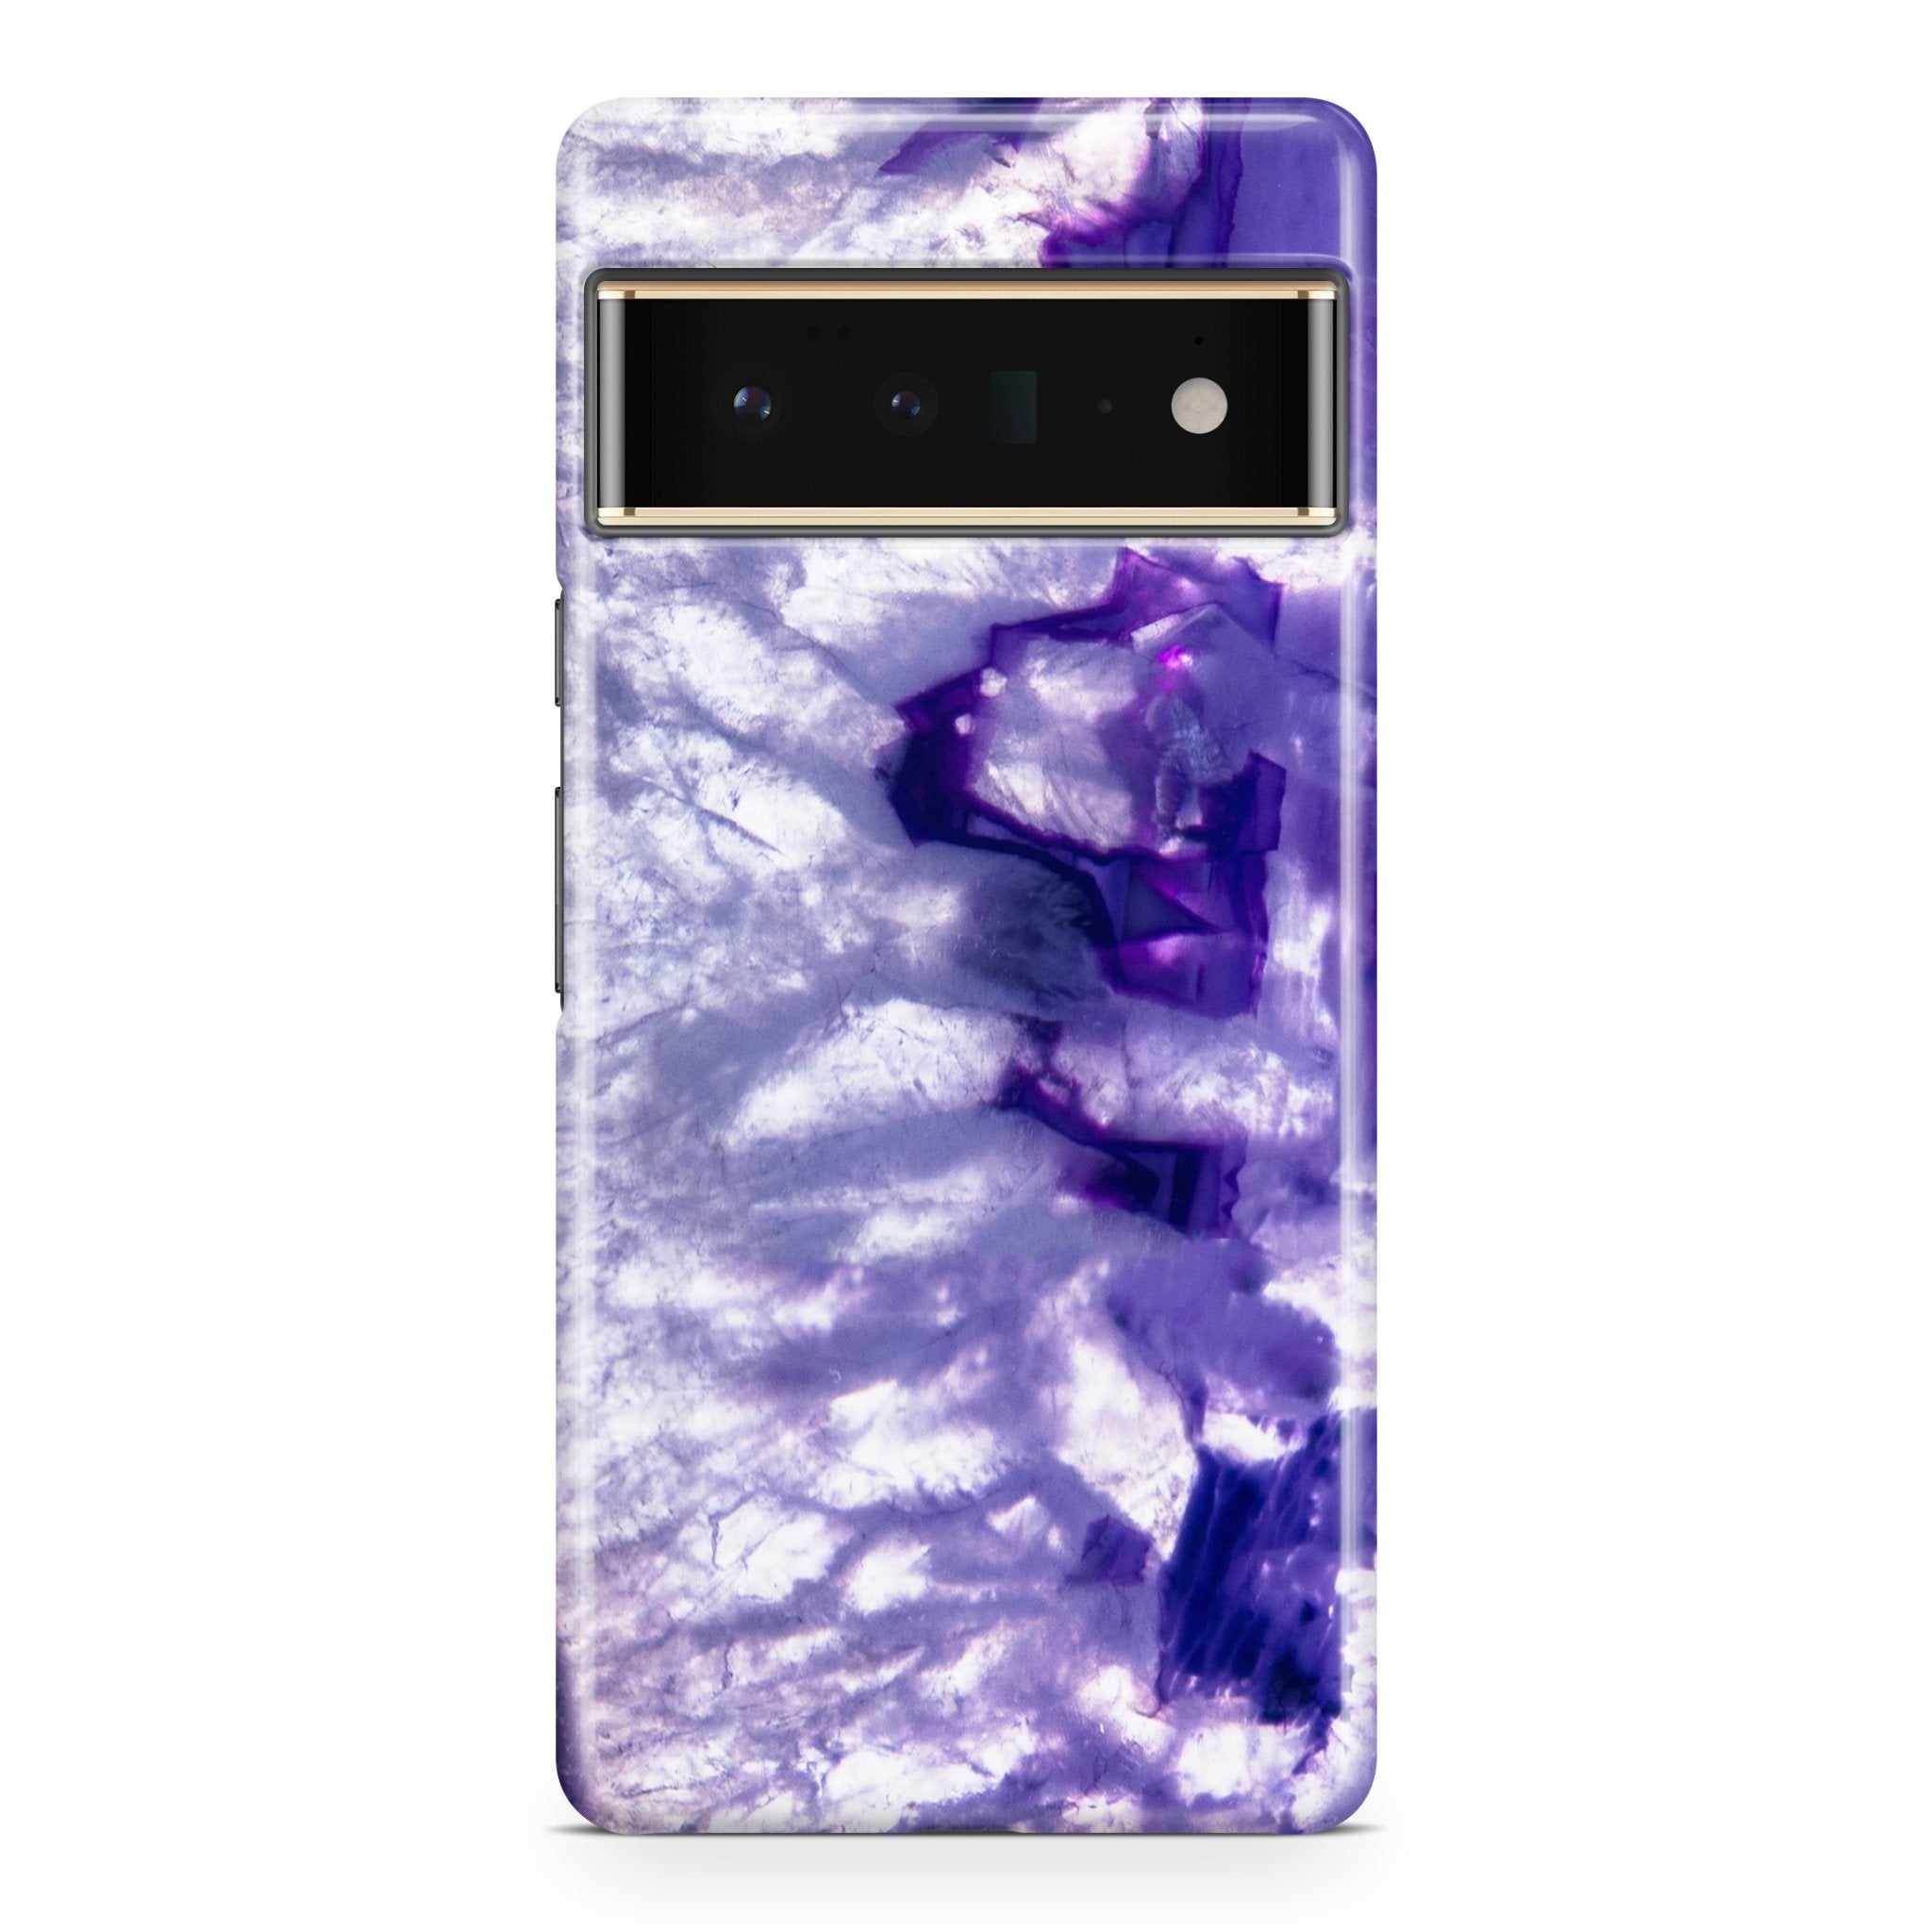 Purple Geode II - Google phone case designs by CaseSwagger